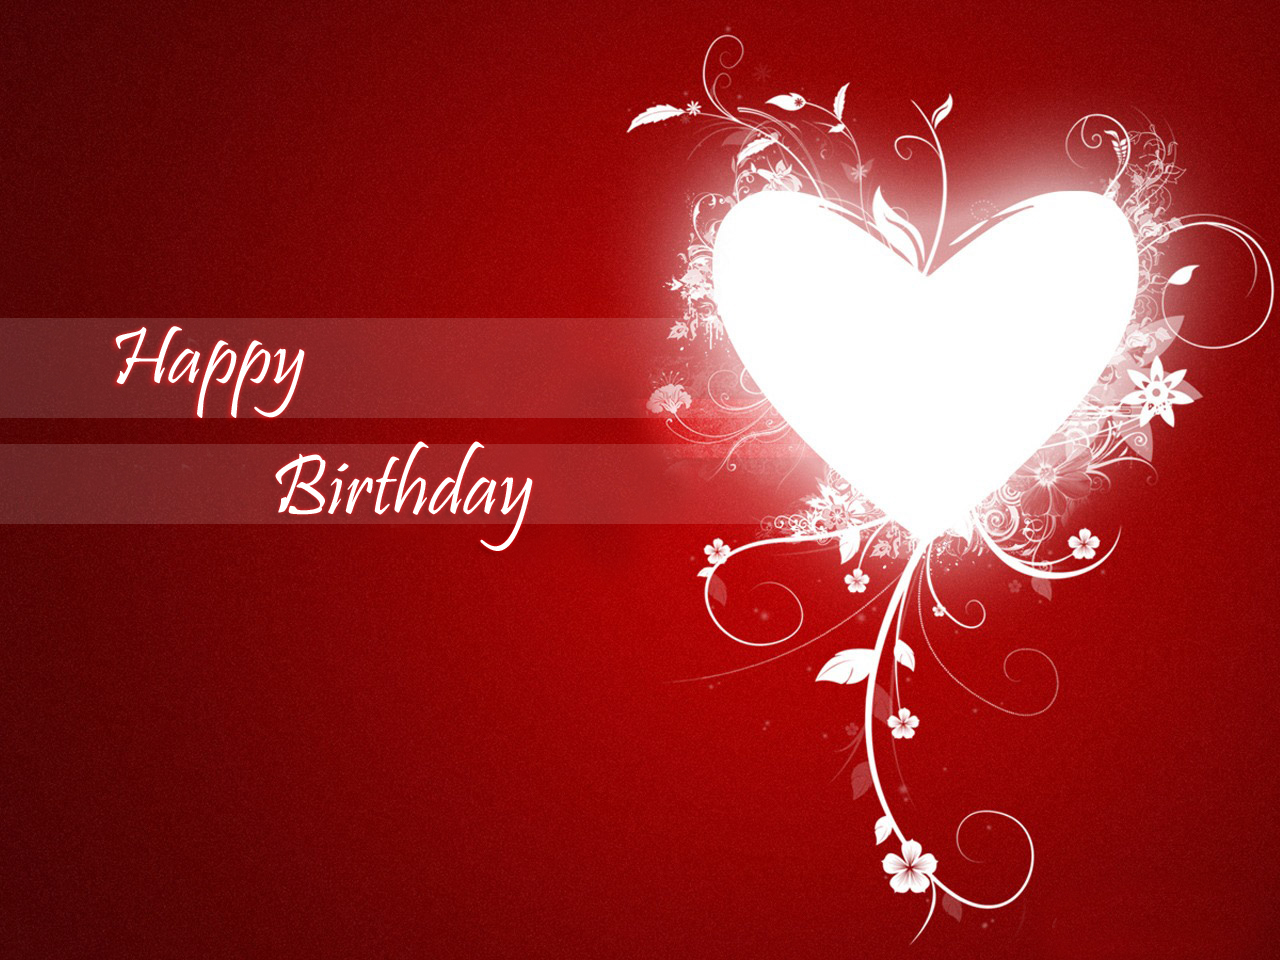 And Photo New BirtHDay Love Wishes Wallpaper